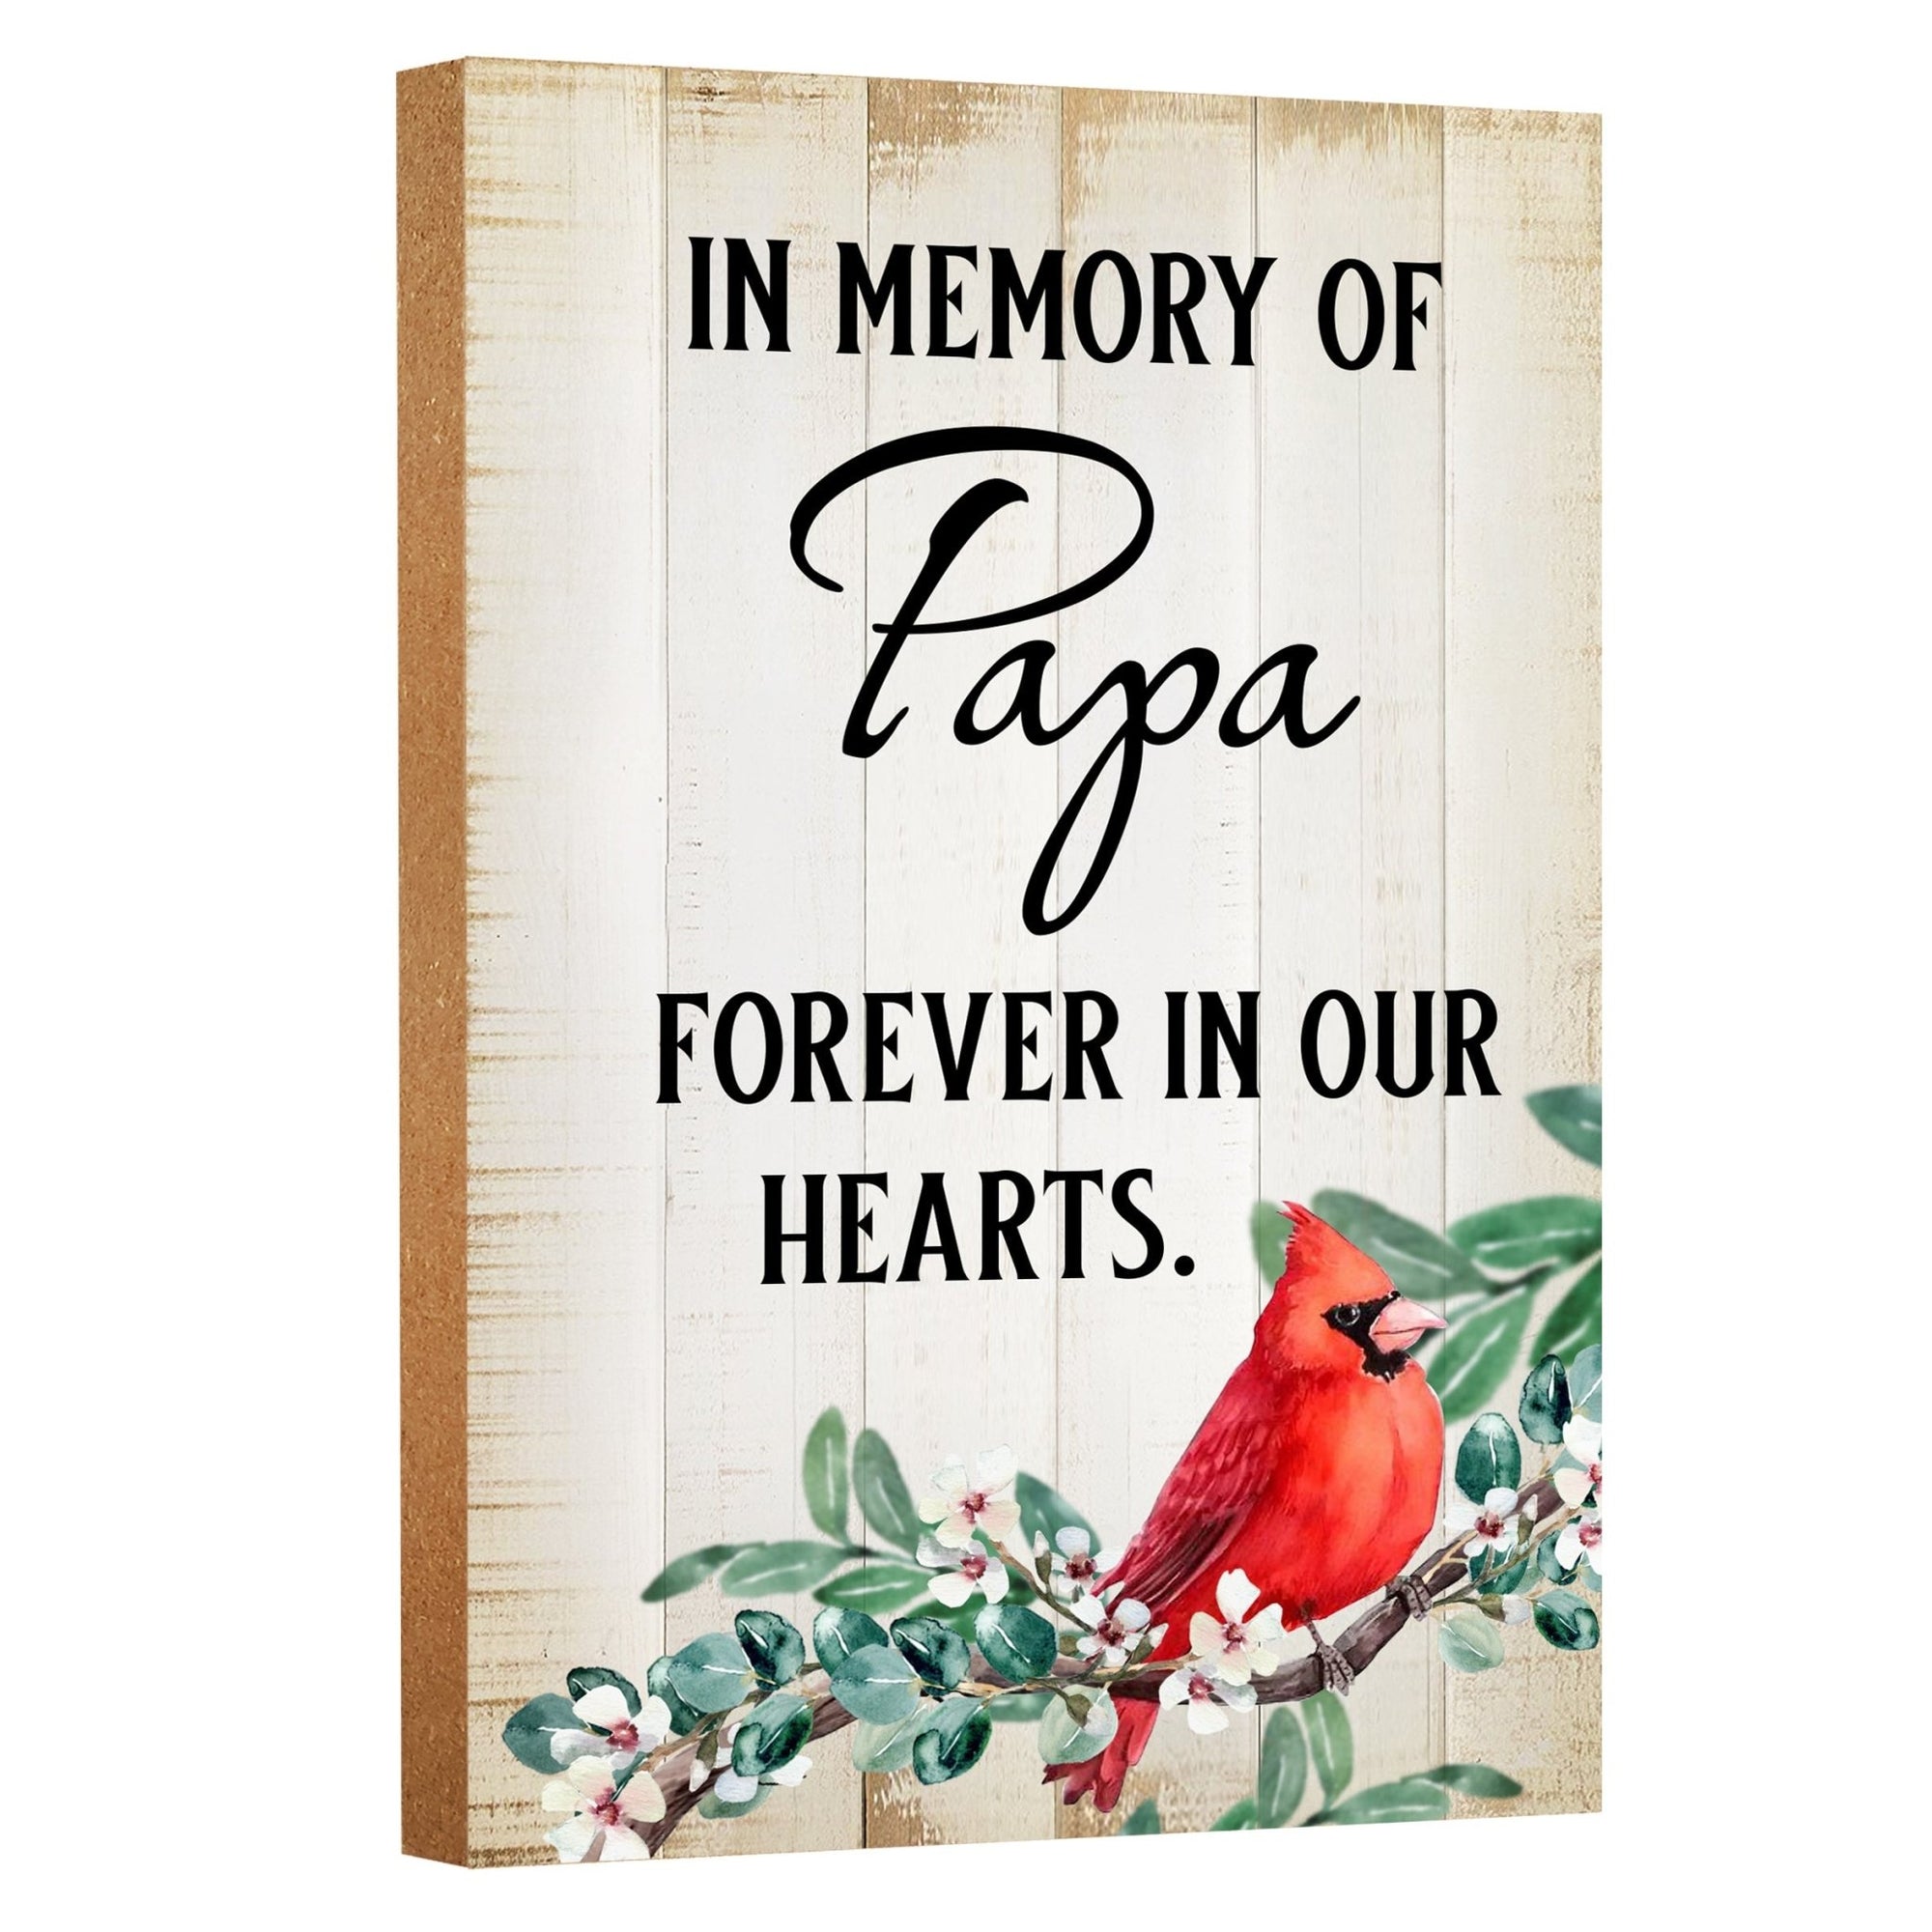 A cardinal-themed memorial gift for the loss of a loved one, symbolizing hope and remembrance.